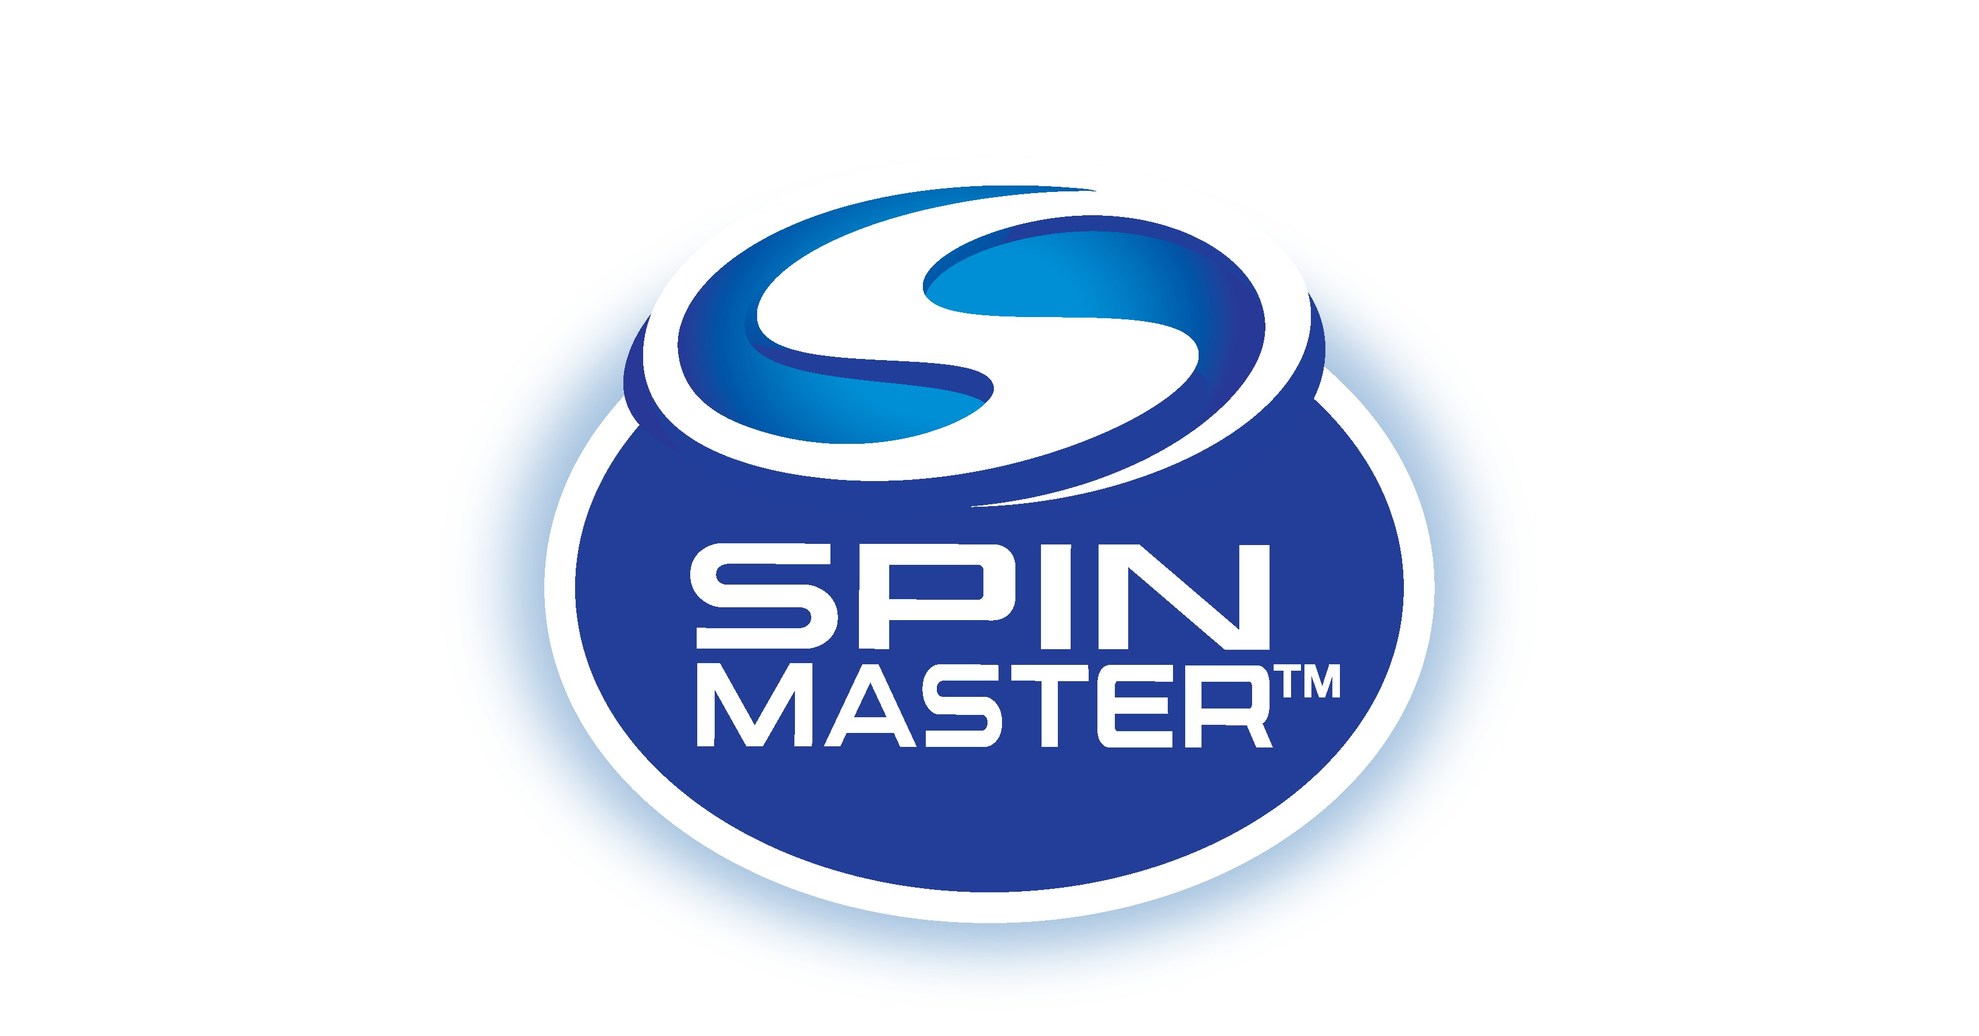 Kidscreen » Archive » Spin Master gets into building category with